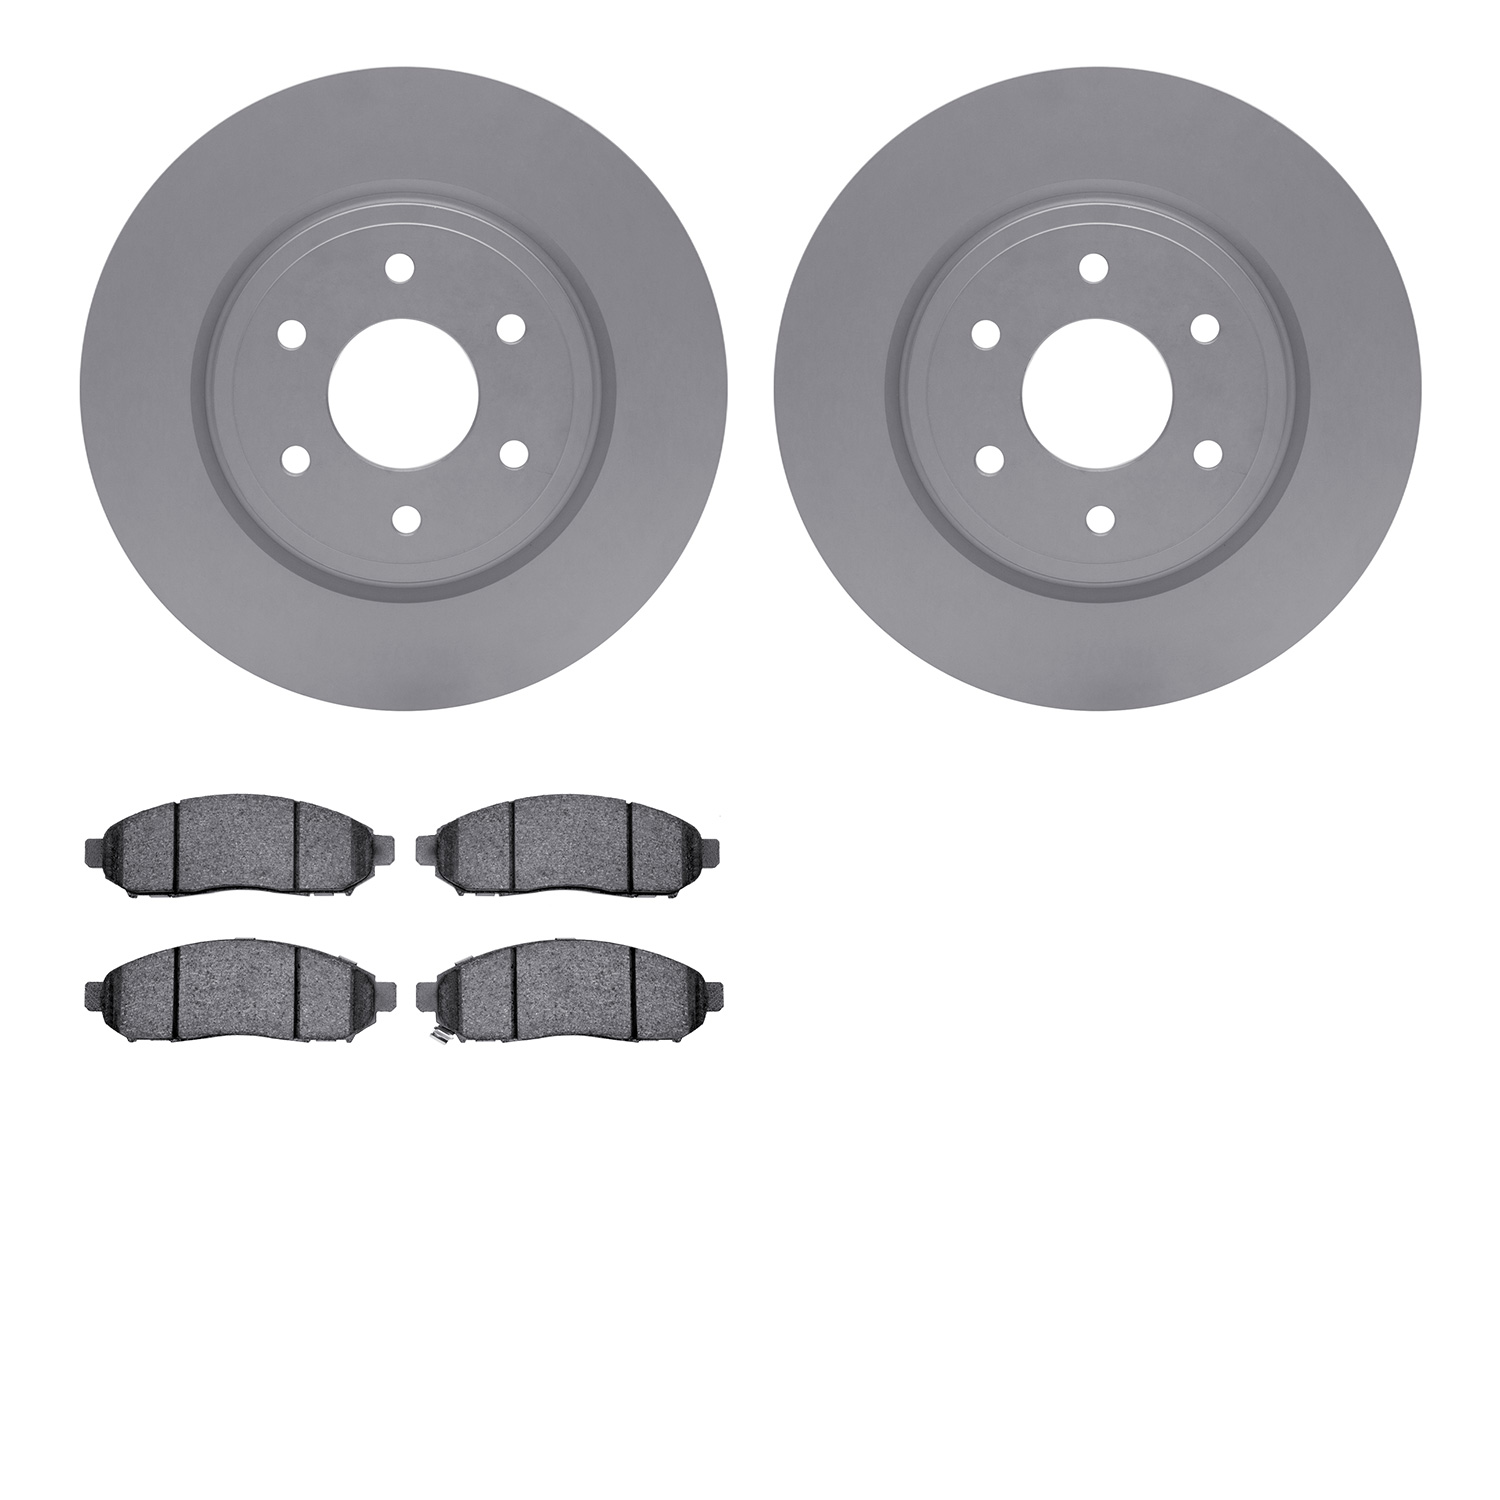 4302-67043 Geospec Brake Rotors with 3000-Series Ceramic Brake Pads Kit, Fits Select Multiple Makes/Models, Position: Front